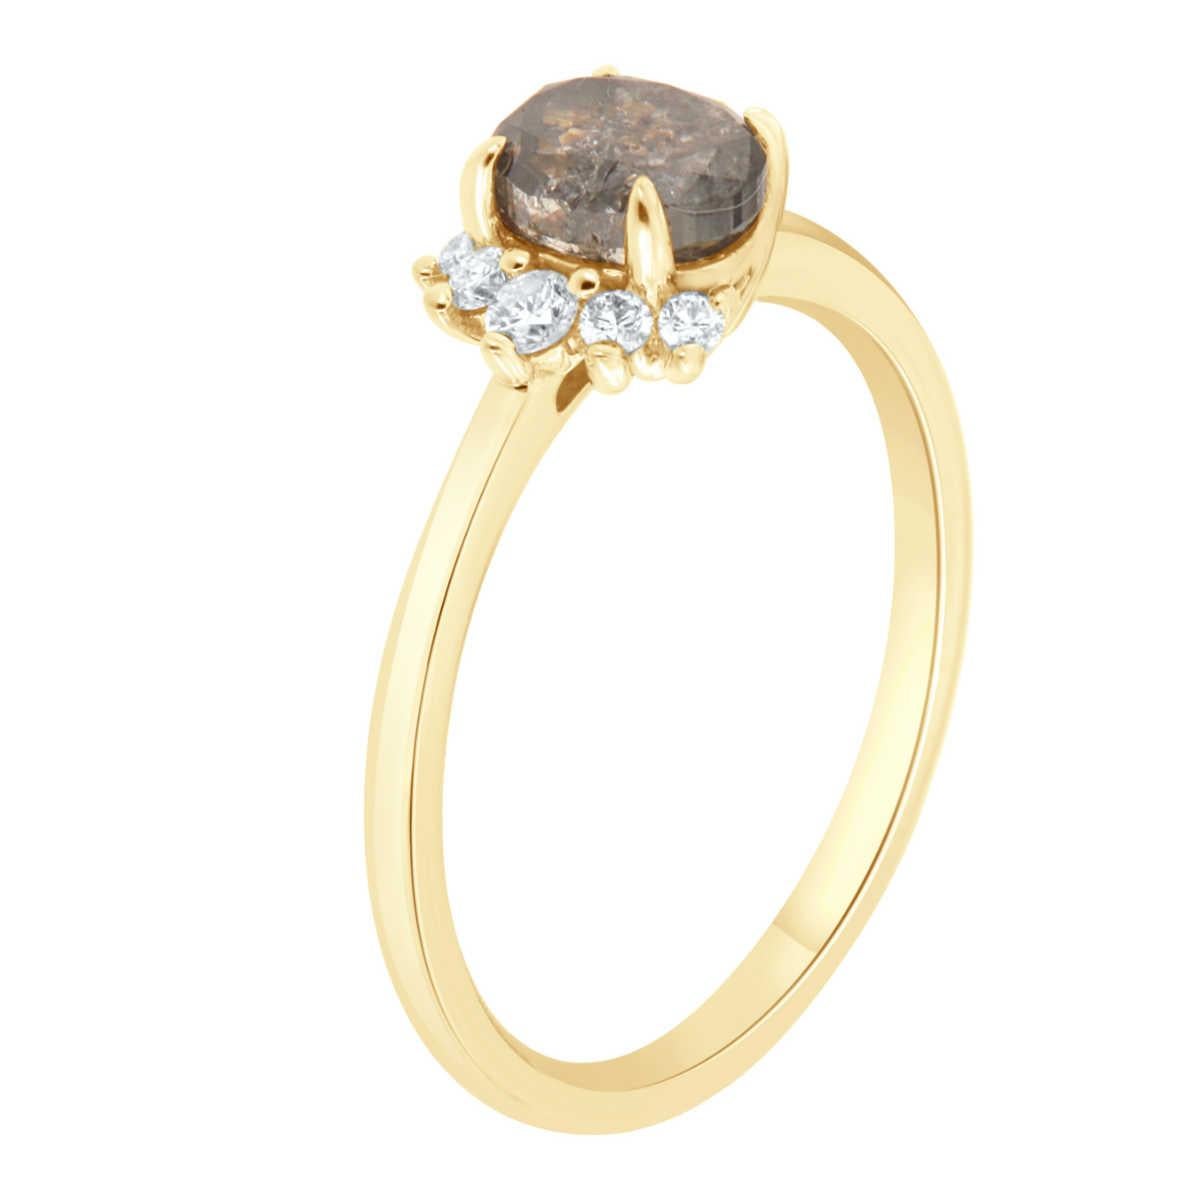 This 14k yellow gold delicate ring features a 1.04 Carat Oval shape Salt & Pepper Natural Diamond partially encircled by a half halo of five (5) brilliant round diamonds on top of a 1.5 MM wide band. 
The total round diamond weight on the ring is